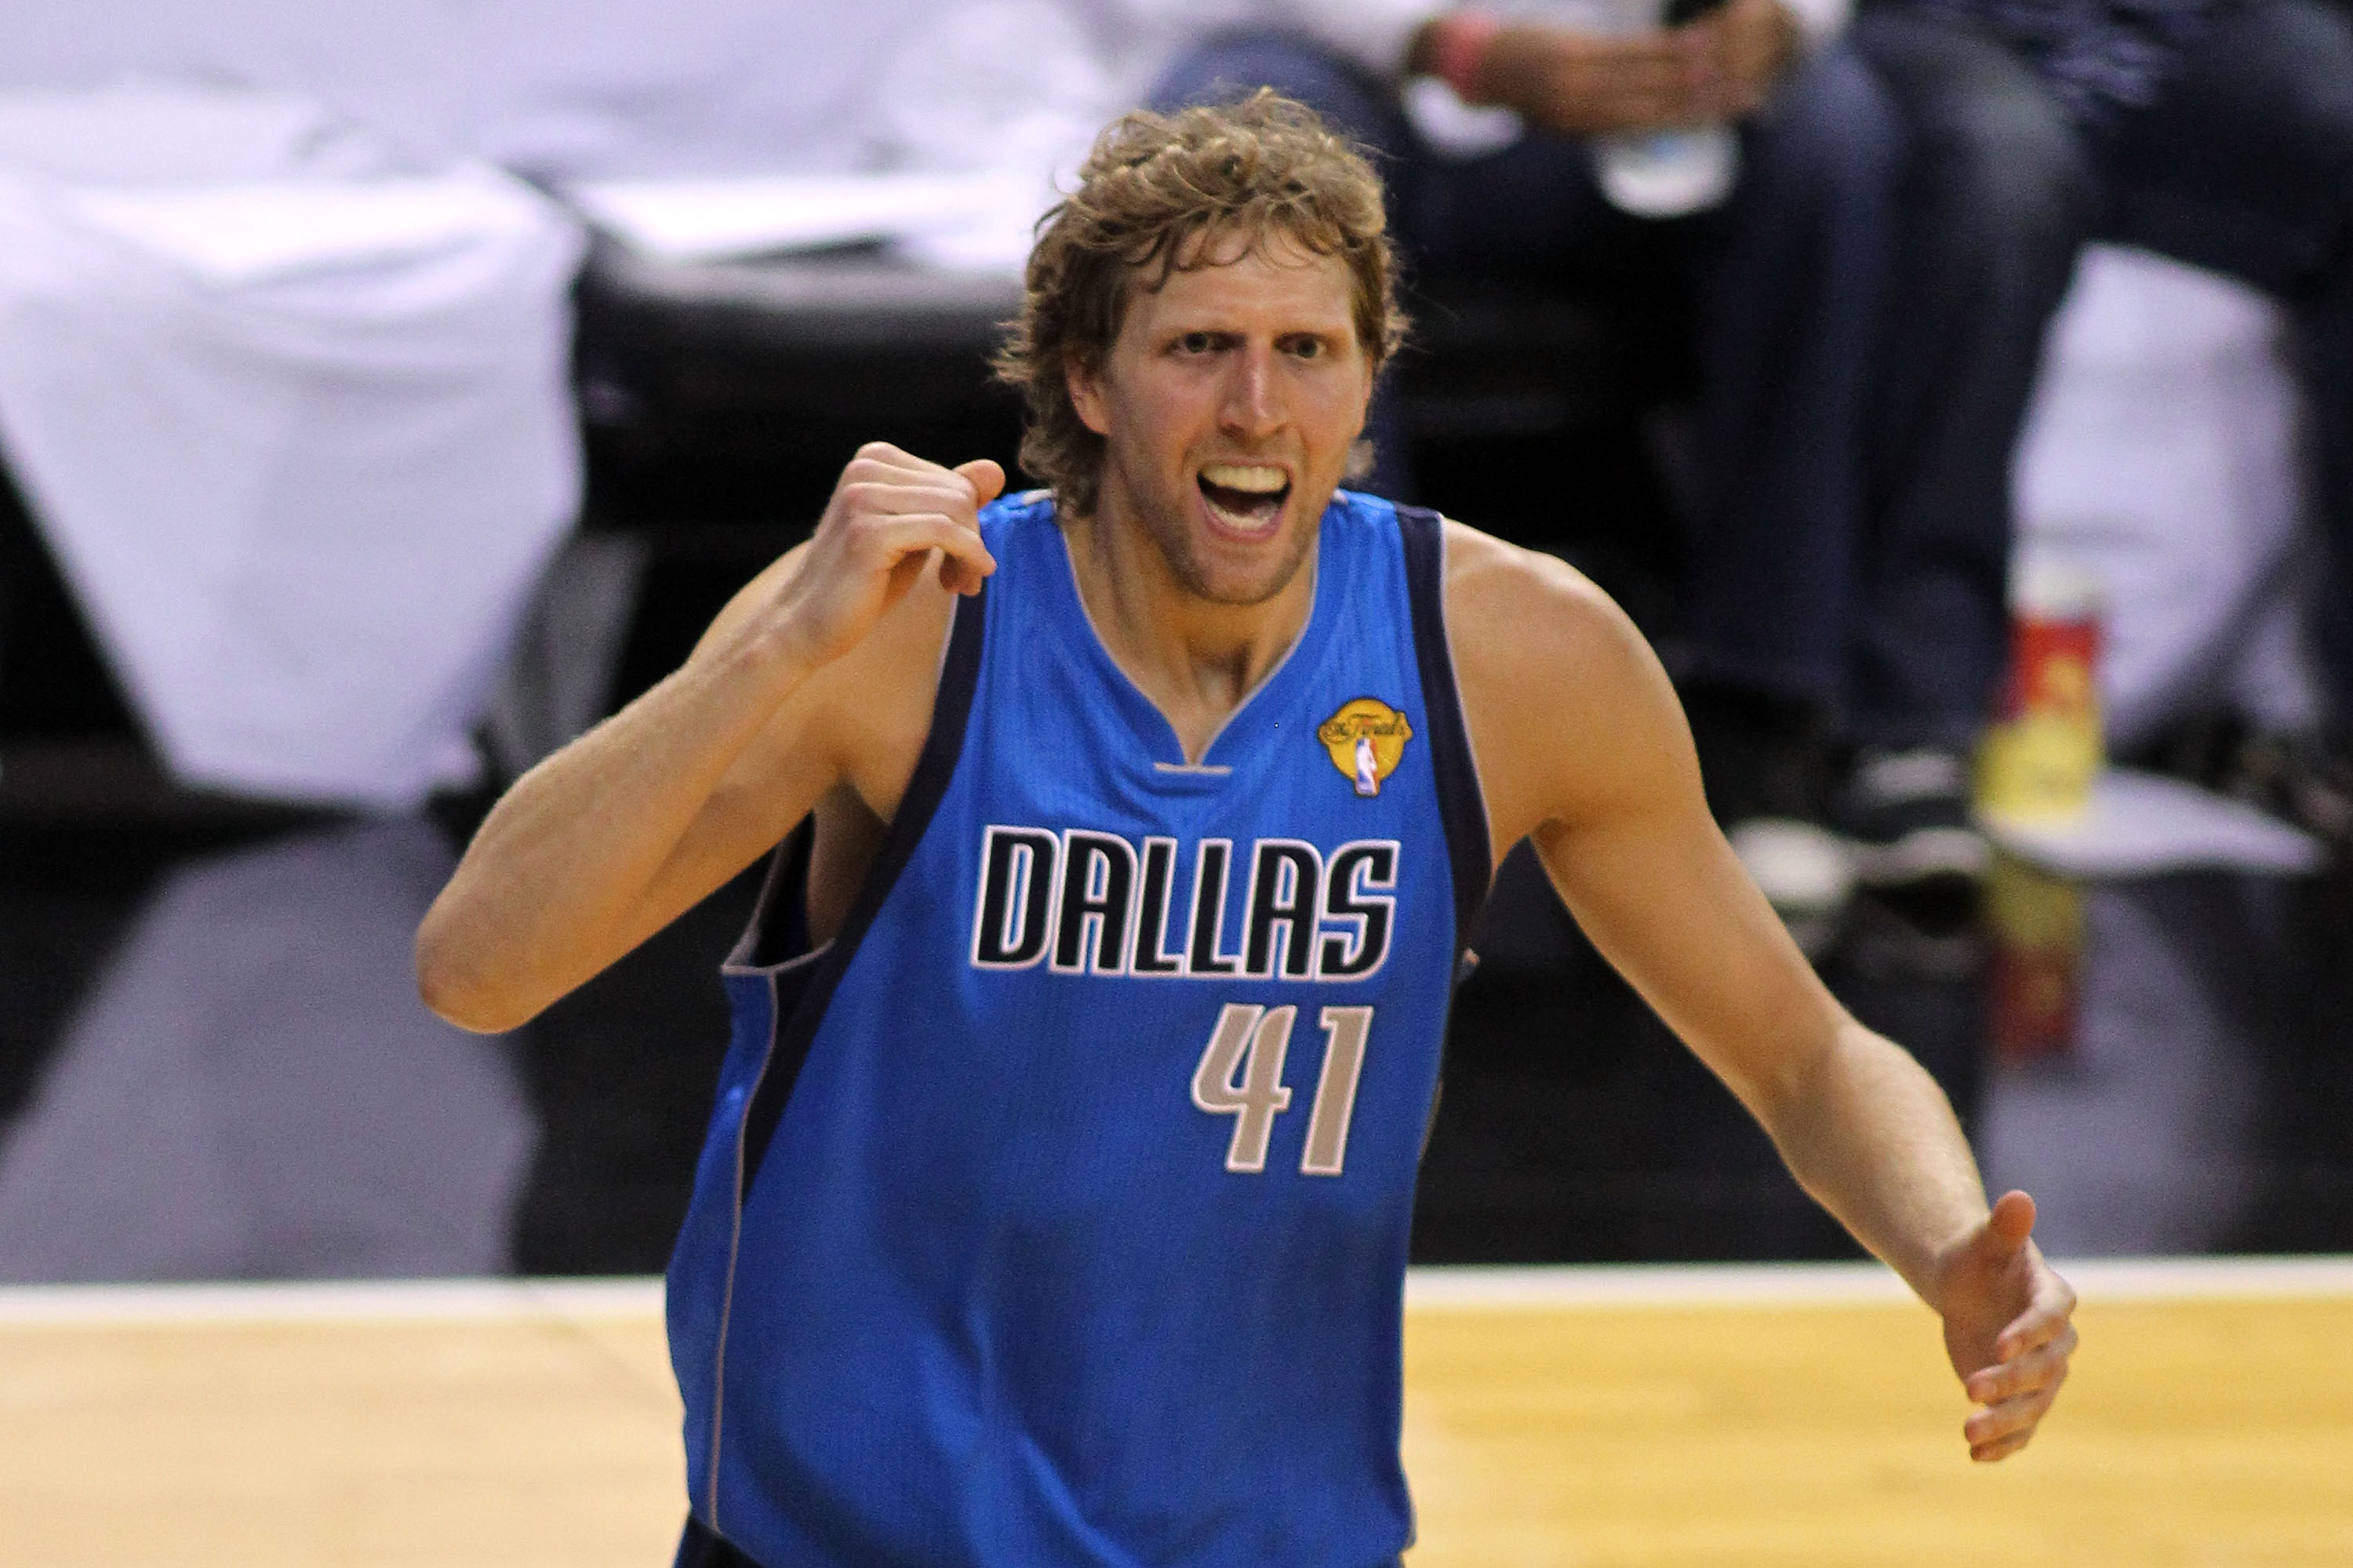 The Athletic NBA on X: Dirk Nowitzki used to get up shots with Peja  Stojaković during the Mavs' 2011 season. One day, they raised the stakes to  a competition of 100 3-pointers.